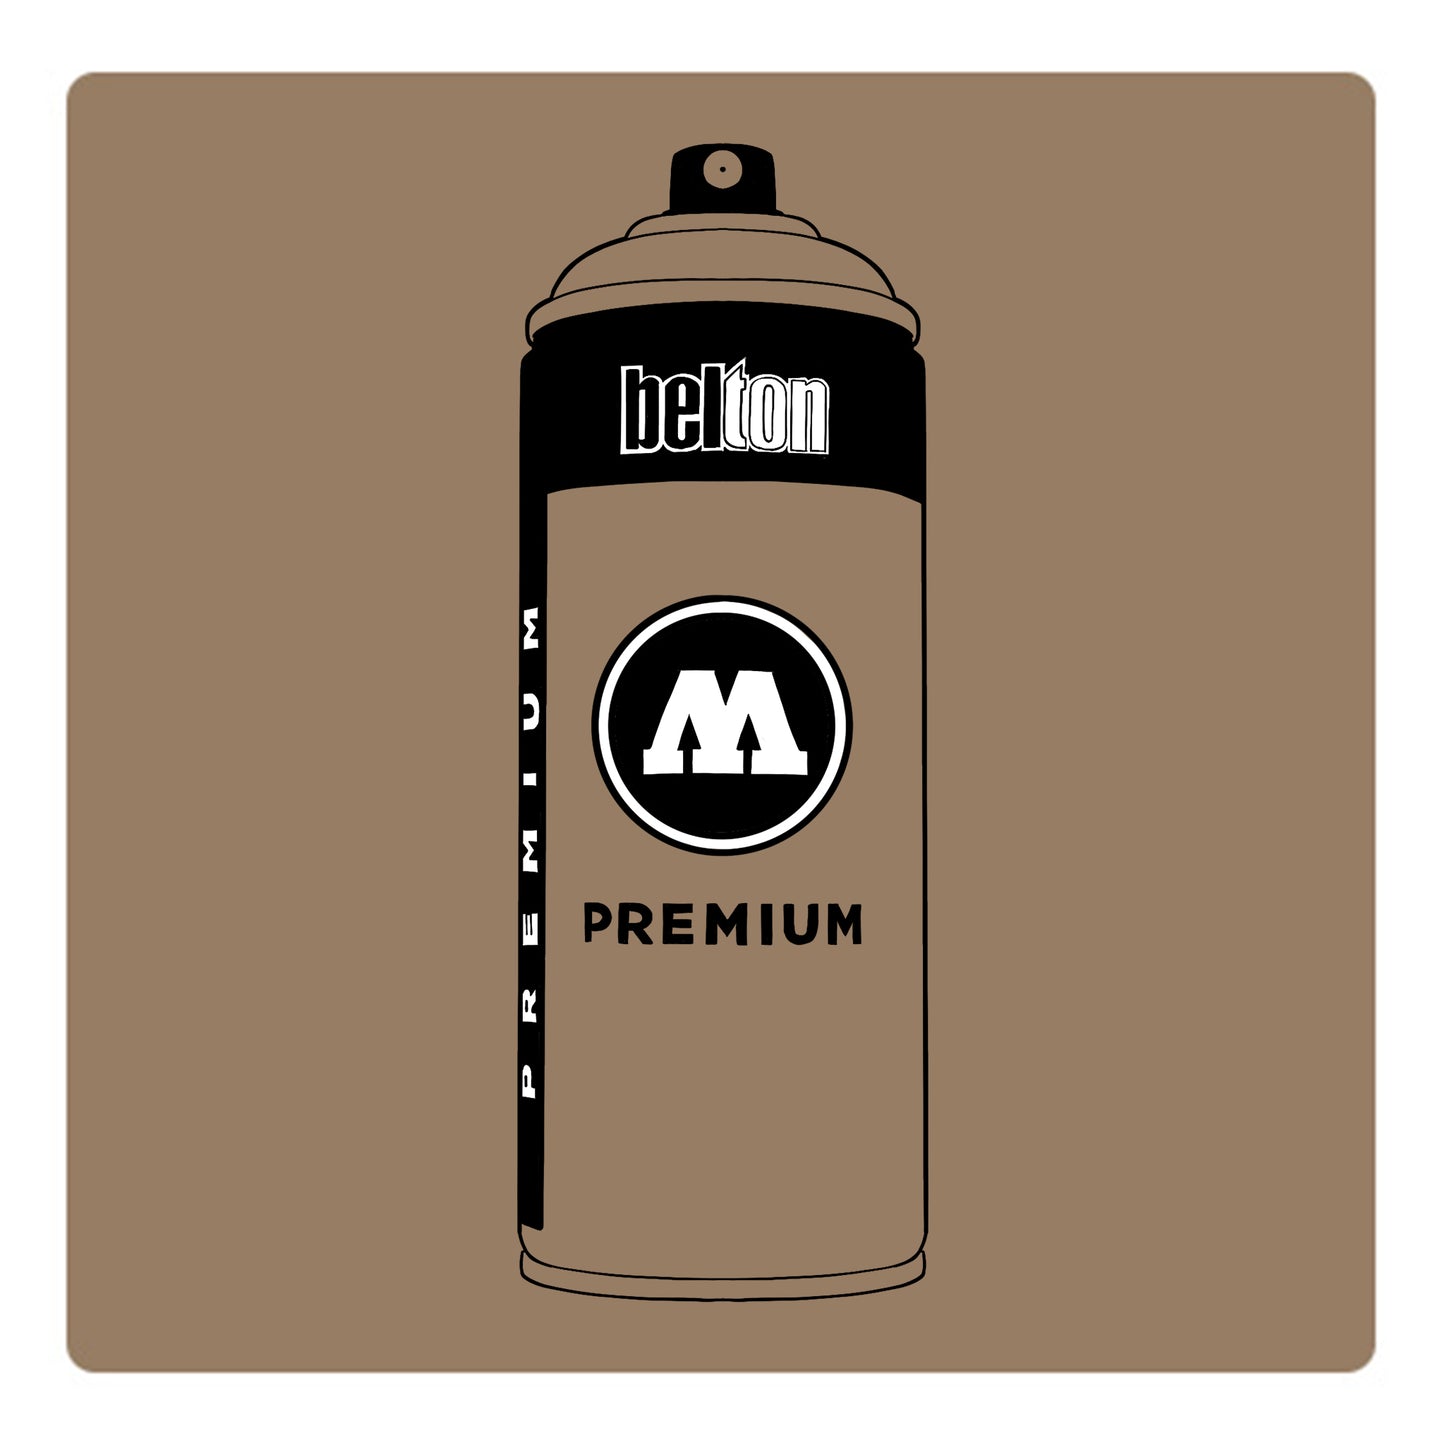 A black outline drawing of a dark beige spray paint can with the words "belton","premium" and the letter"M" written on the face in black and white font. The background is a color swatch of the same dark beige with a white border